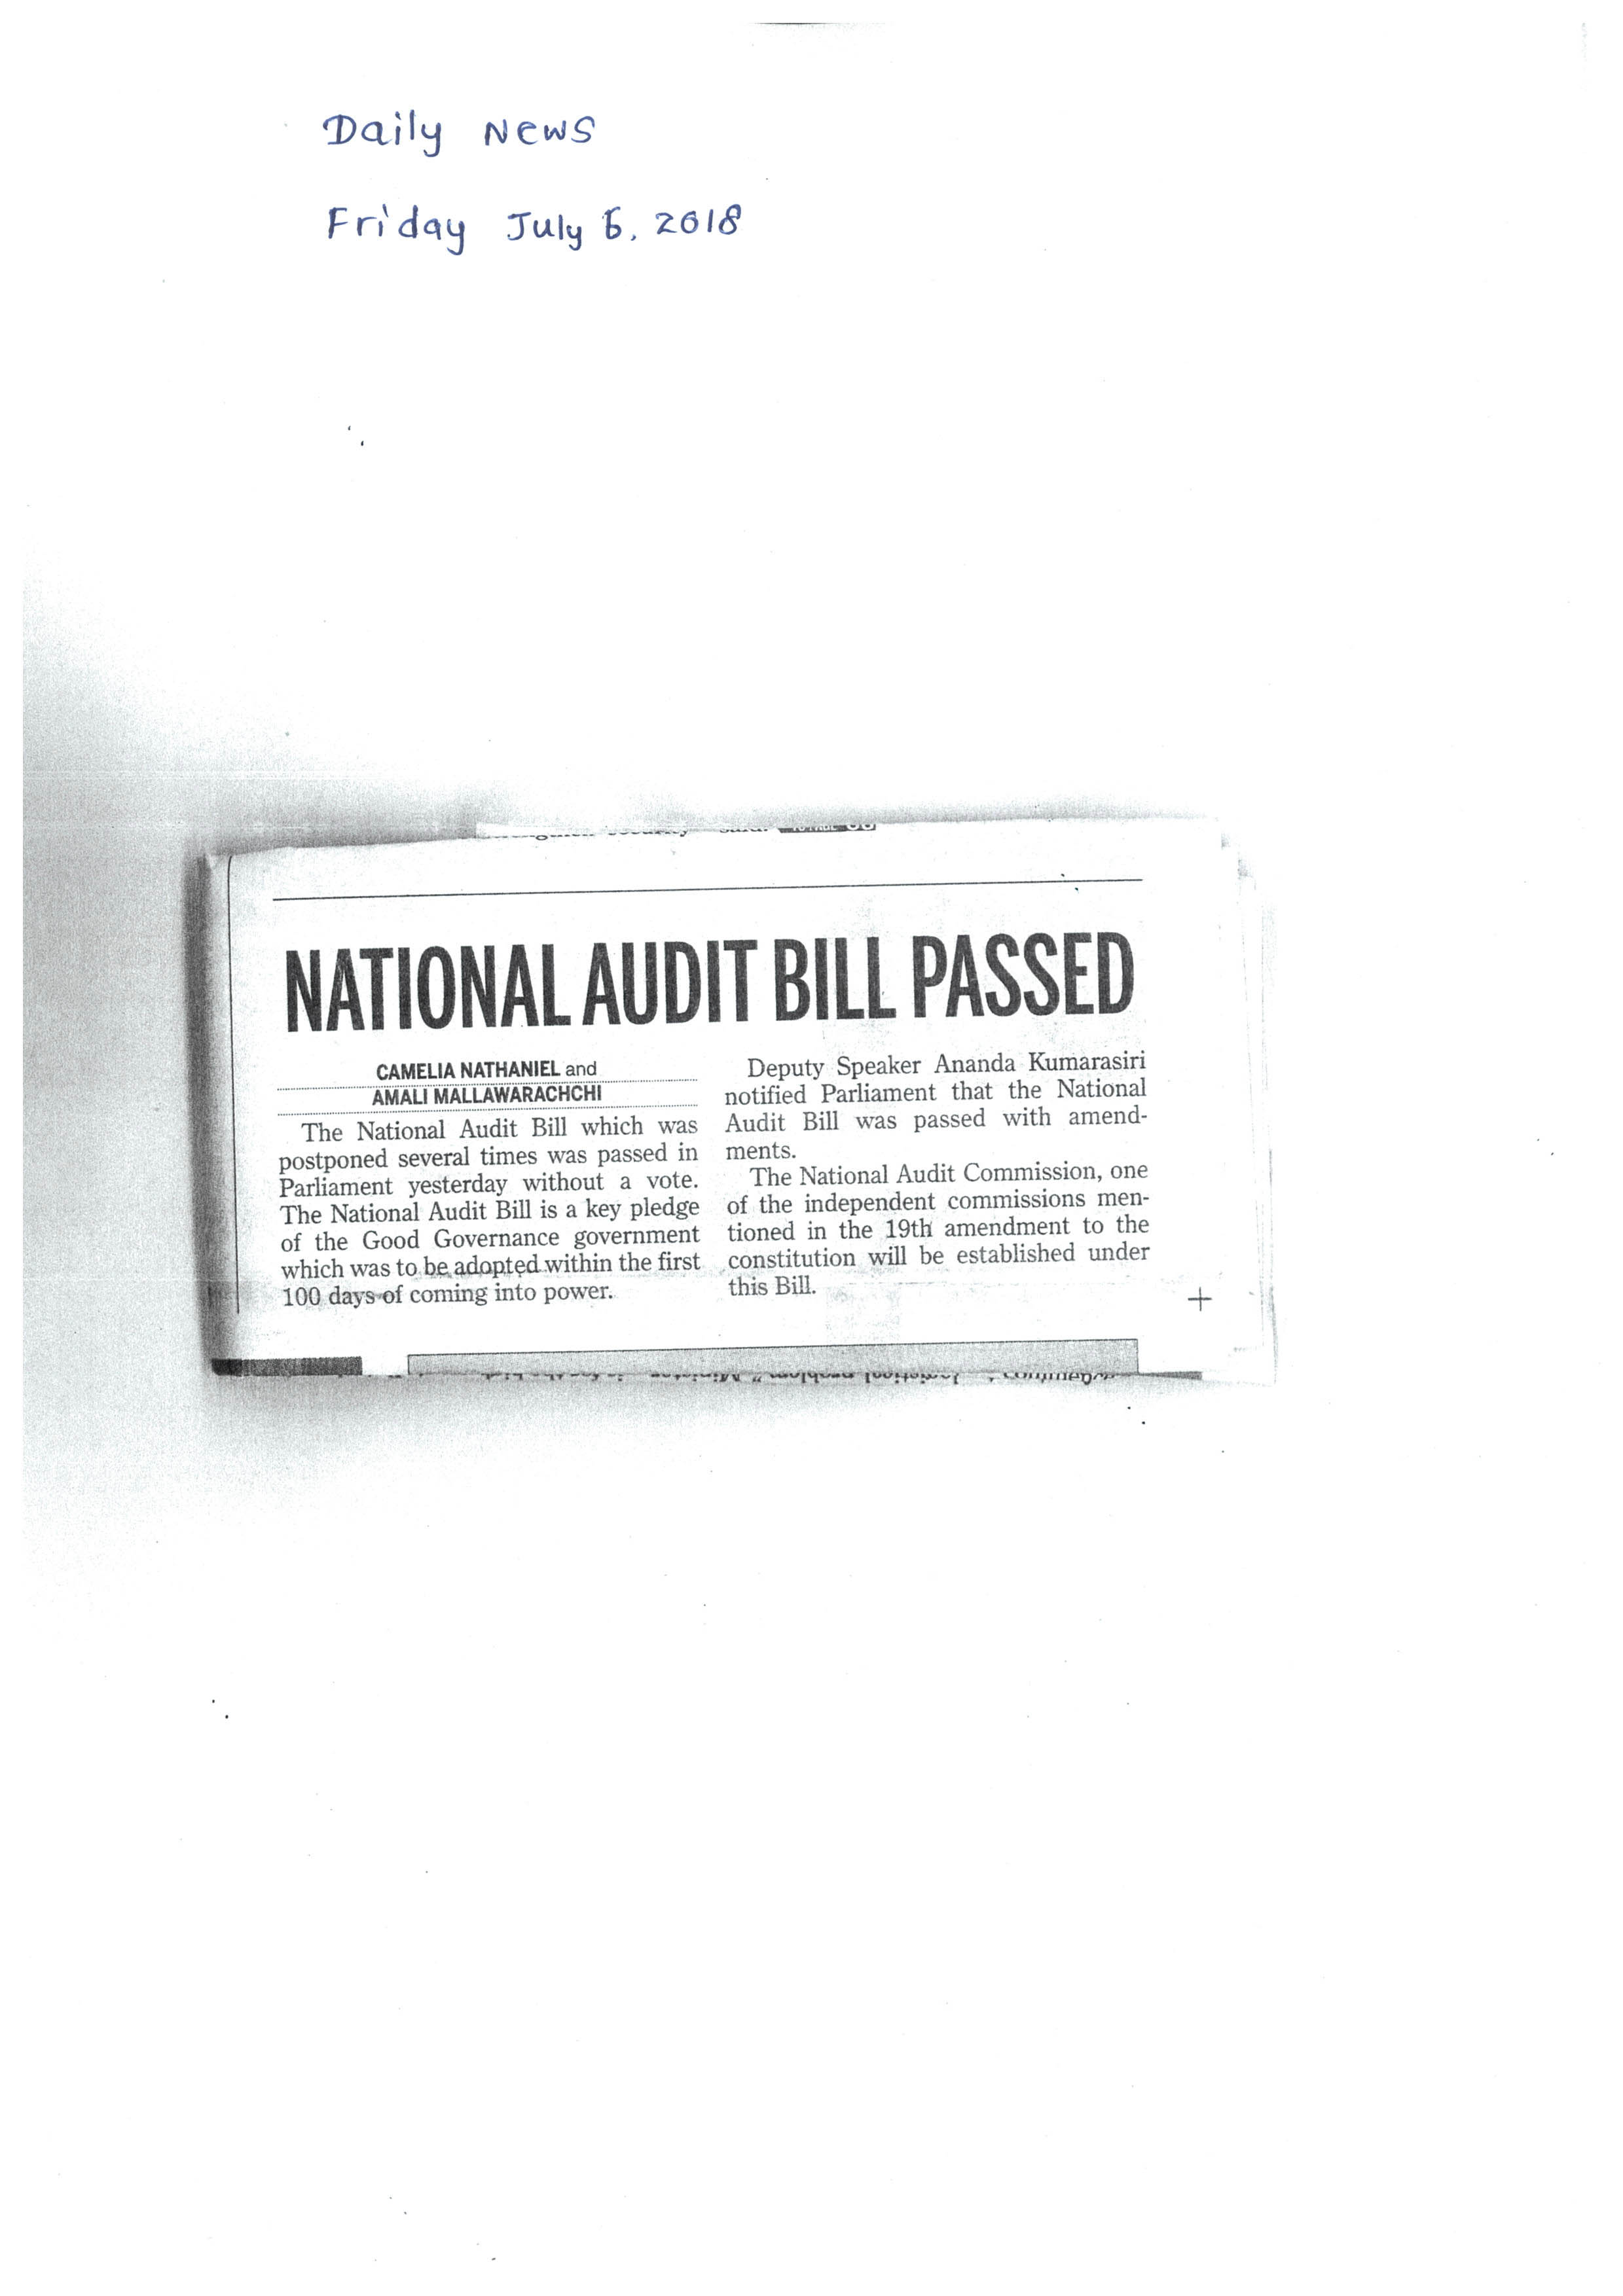 National audit bill passed